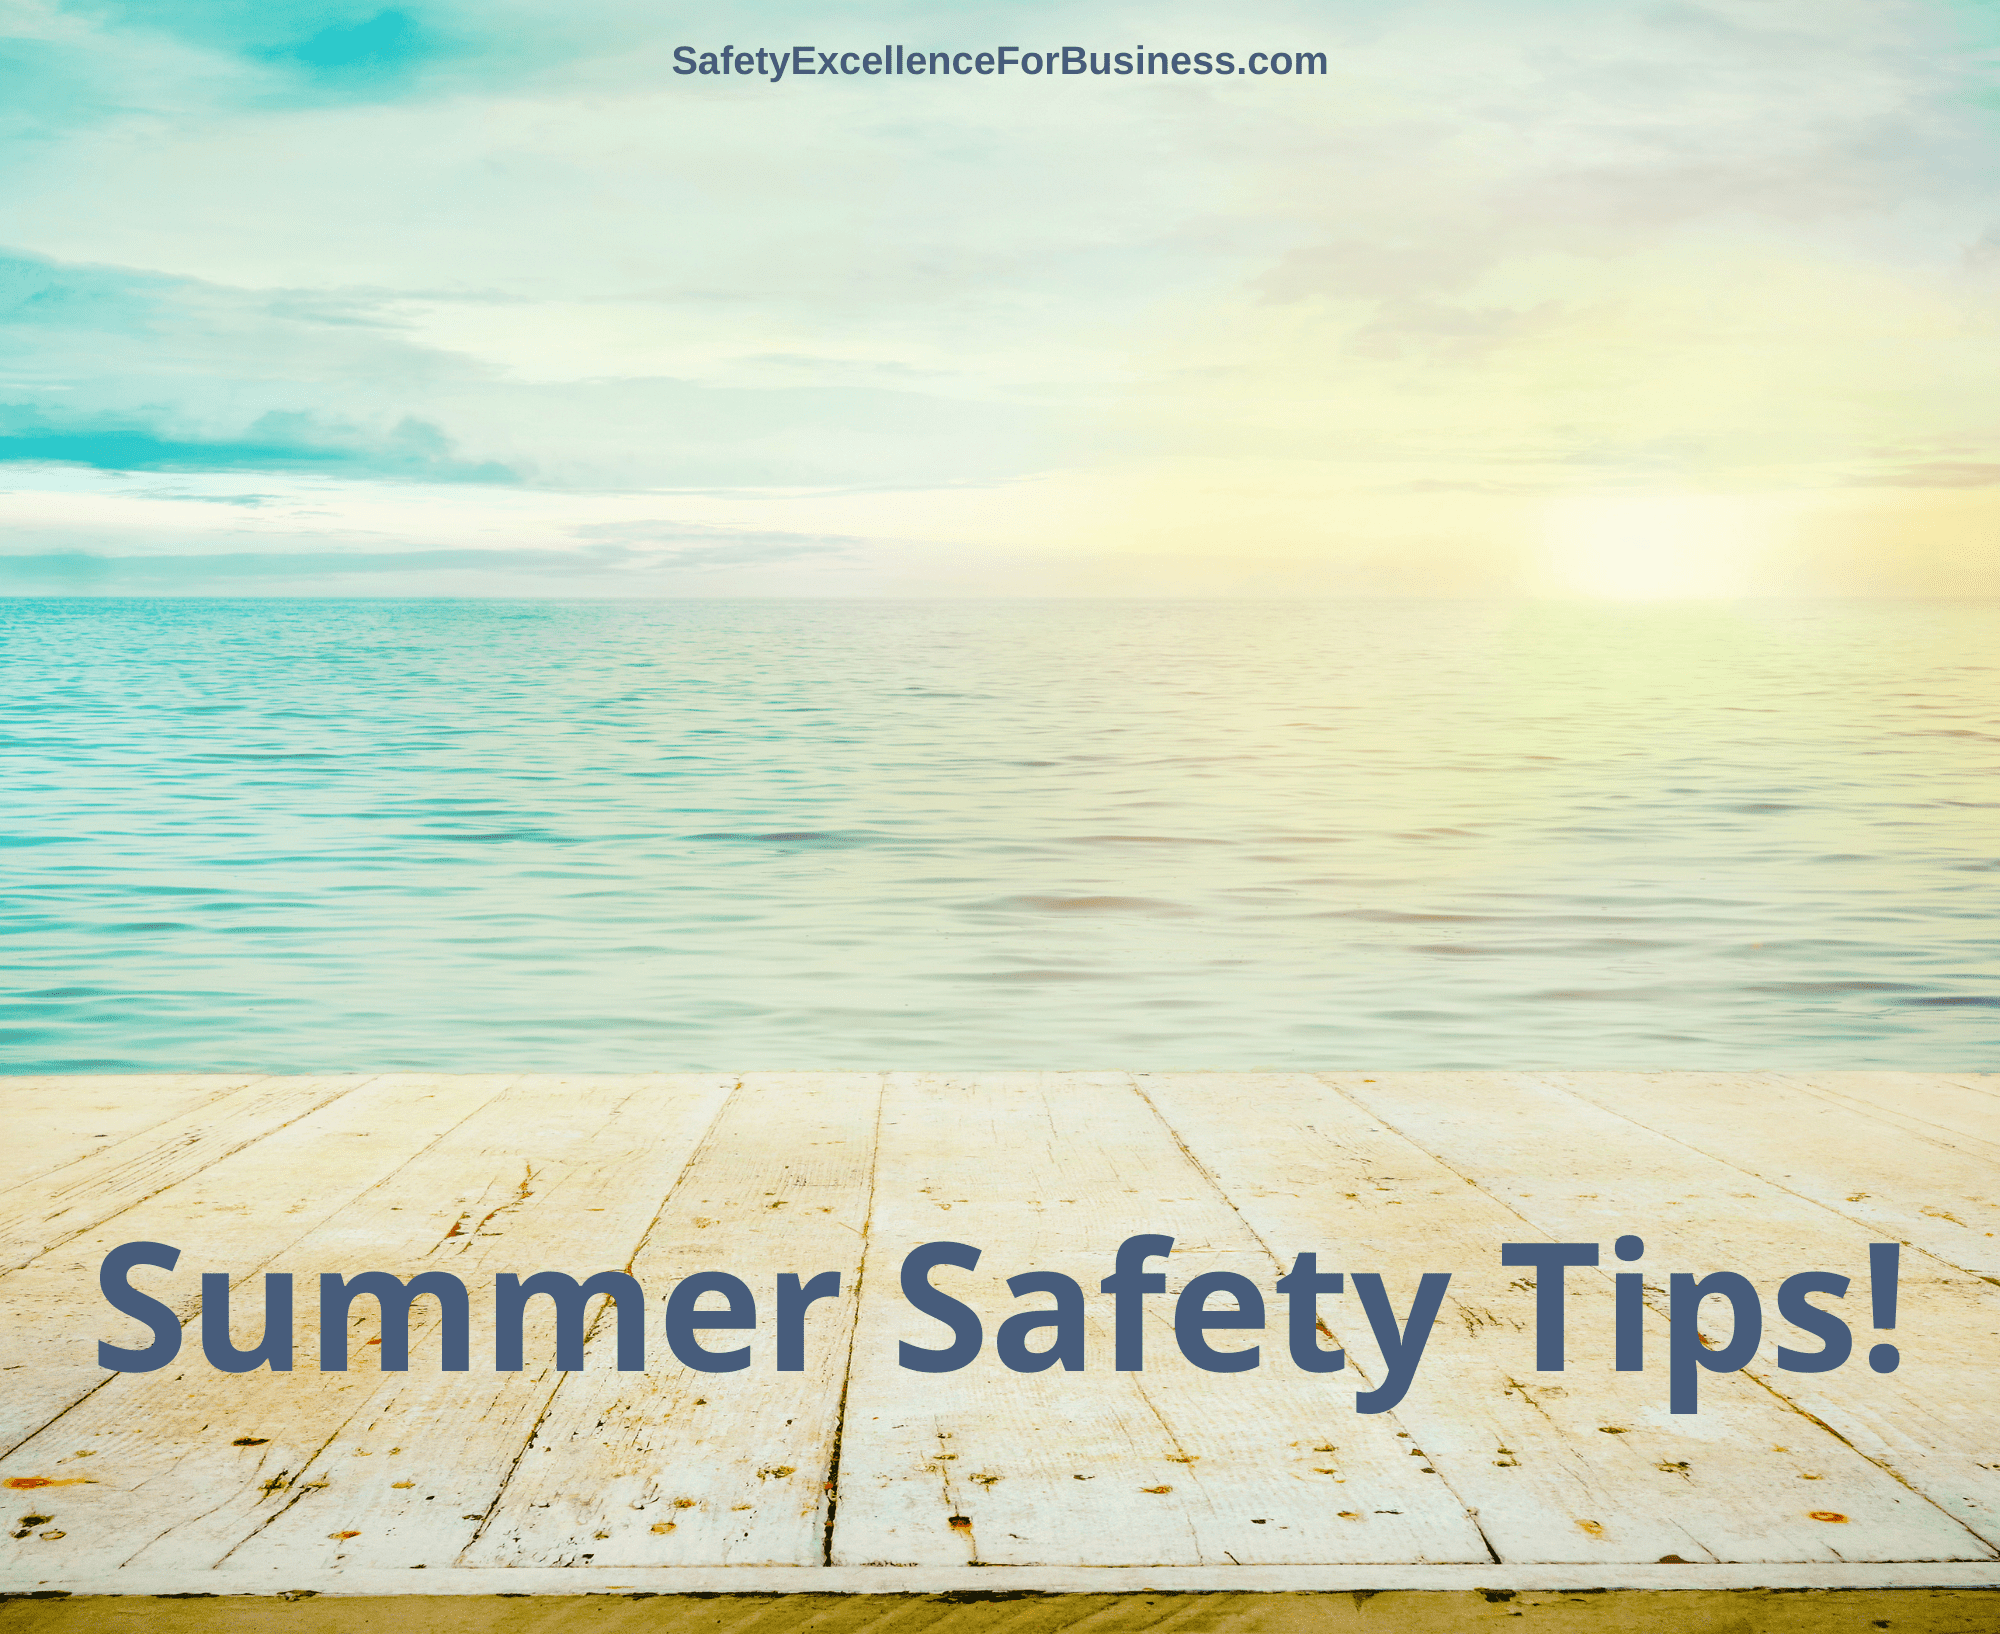 summer safety tips for work and home